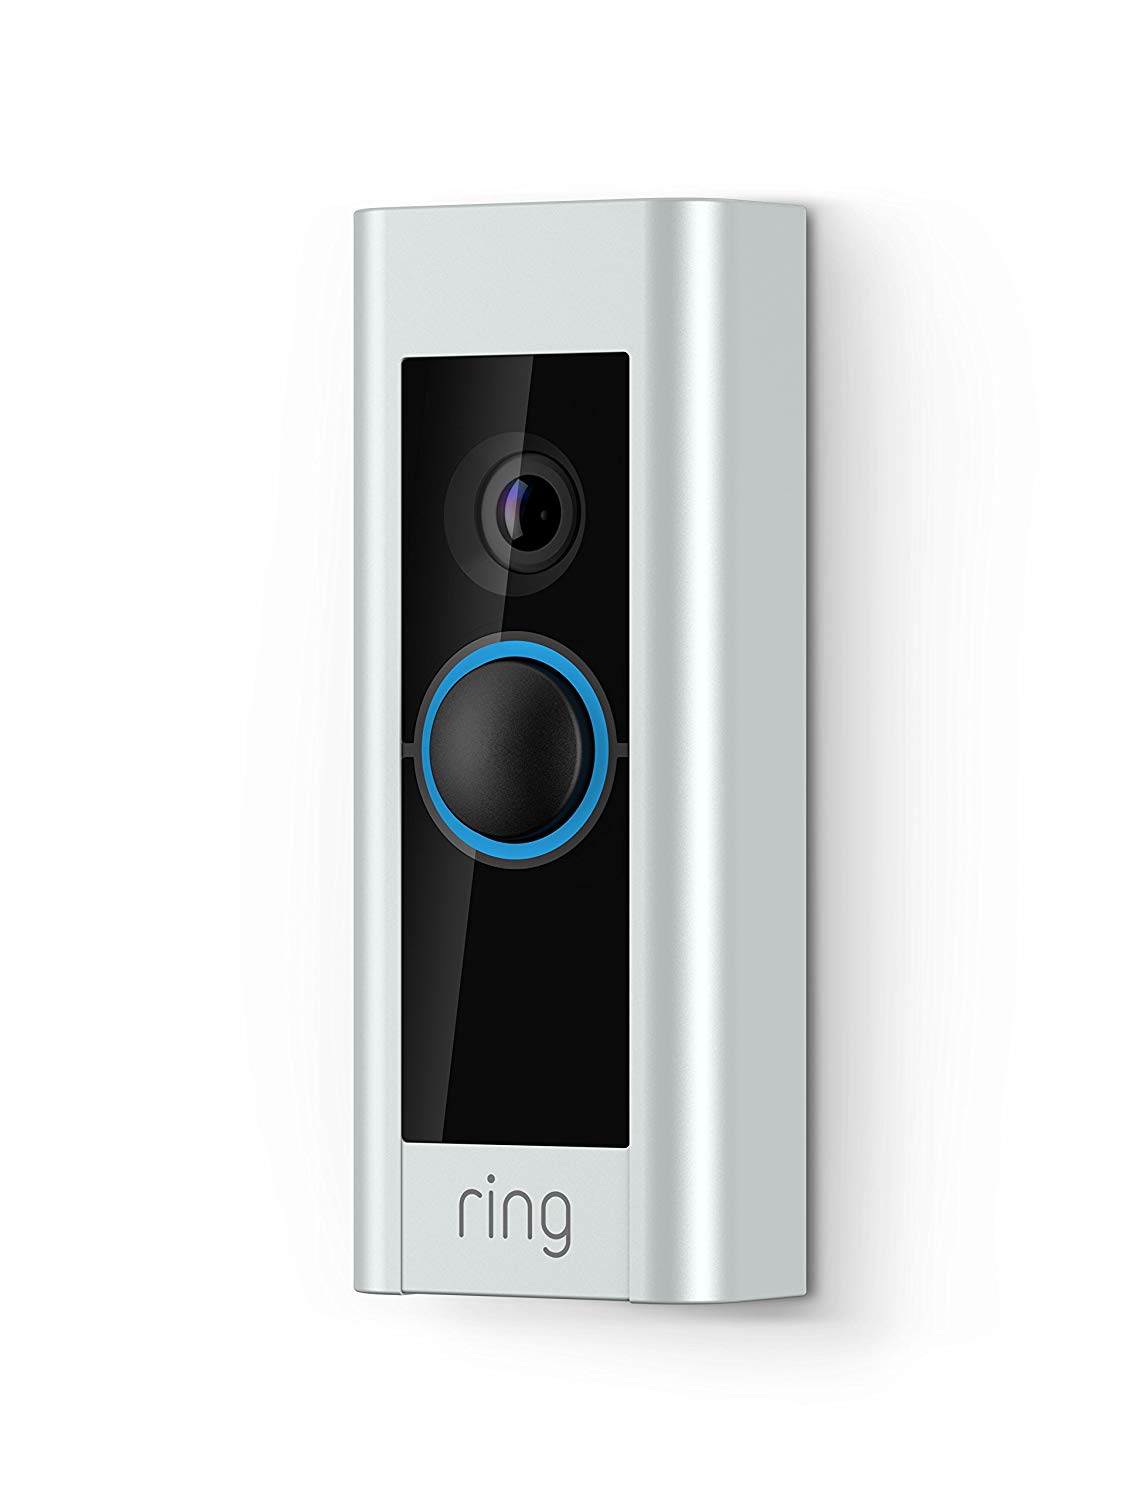 video doorbell that works with google